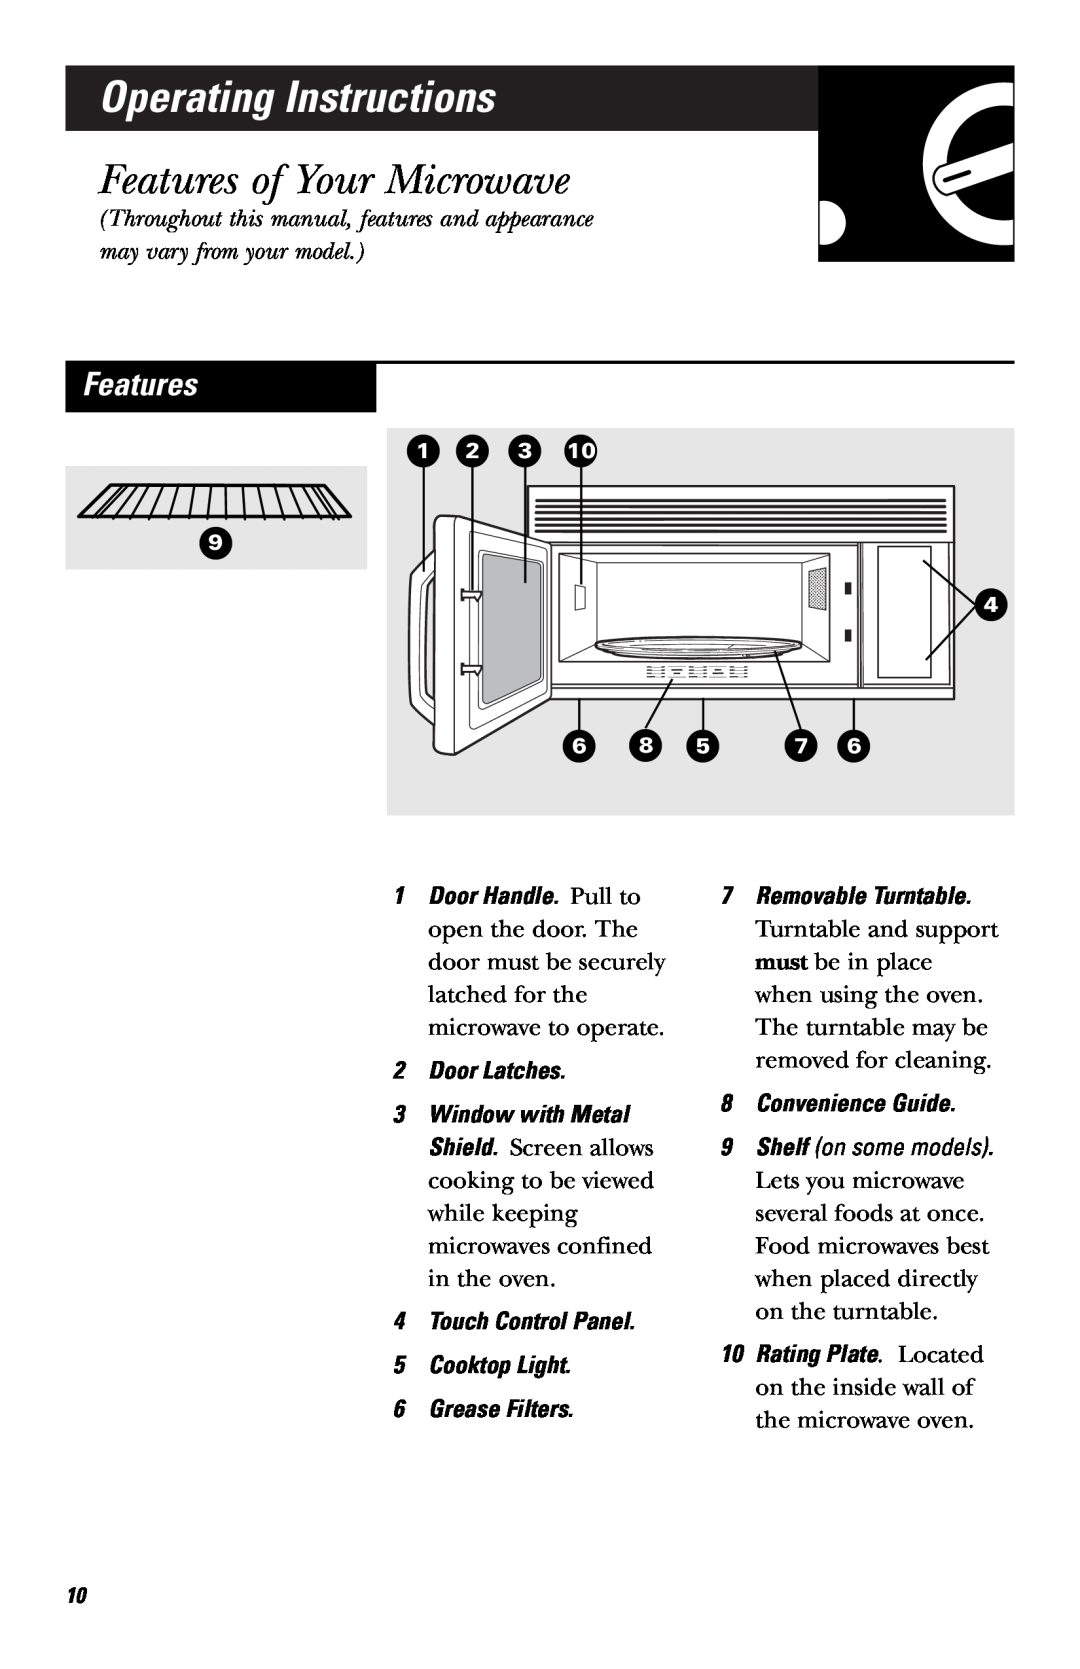 GE JNM1541, HVM1540 Operating Instructions, Features of Your Microwave, 2Door Latches, 4Touch Control Panel 5Cooktop Light 